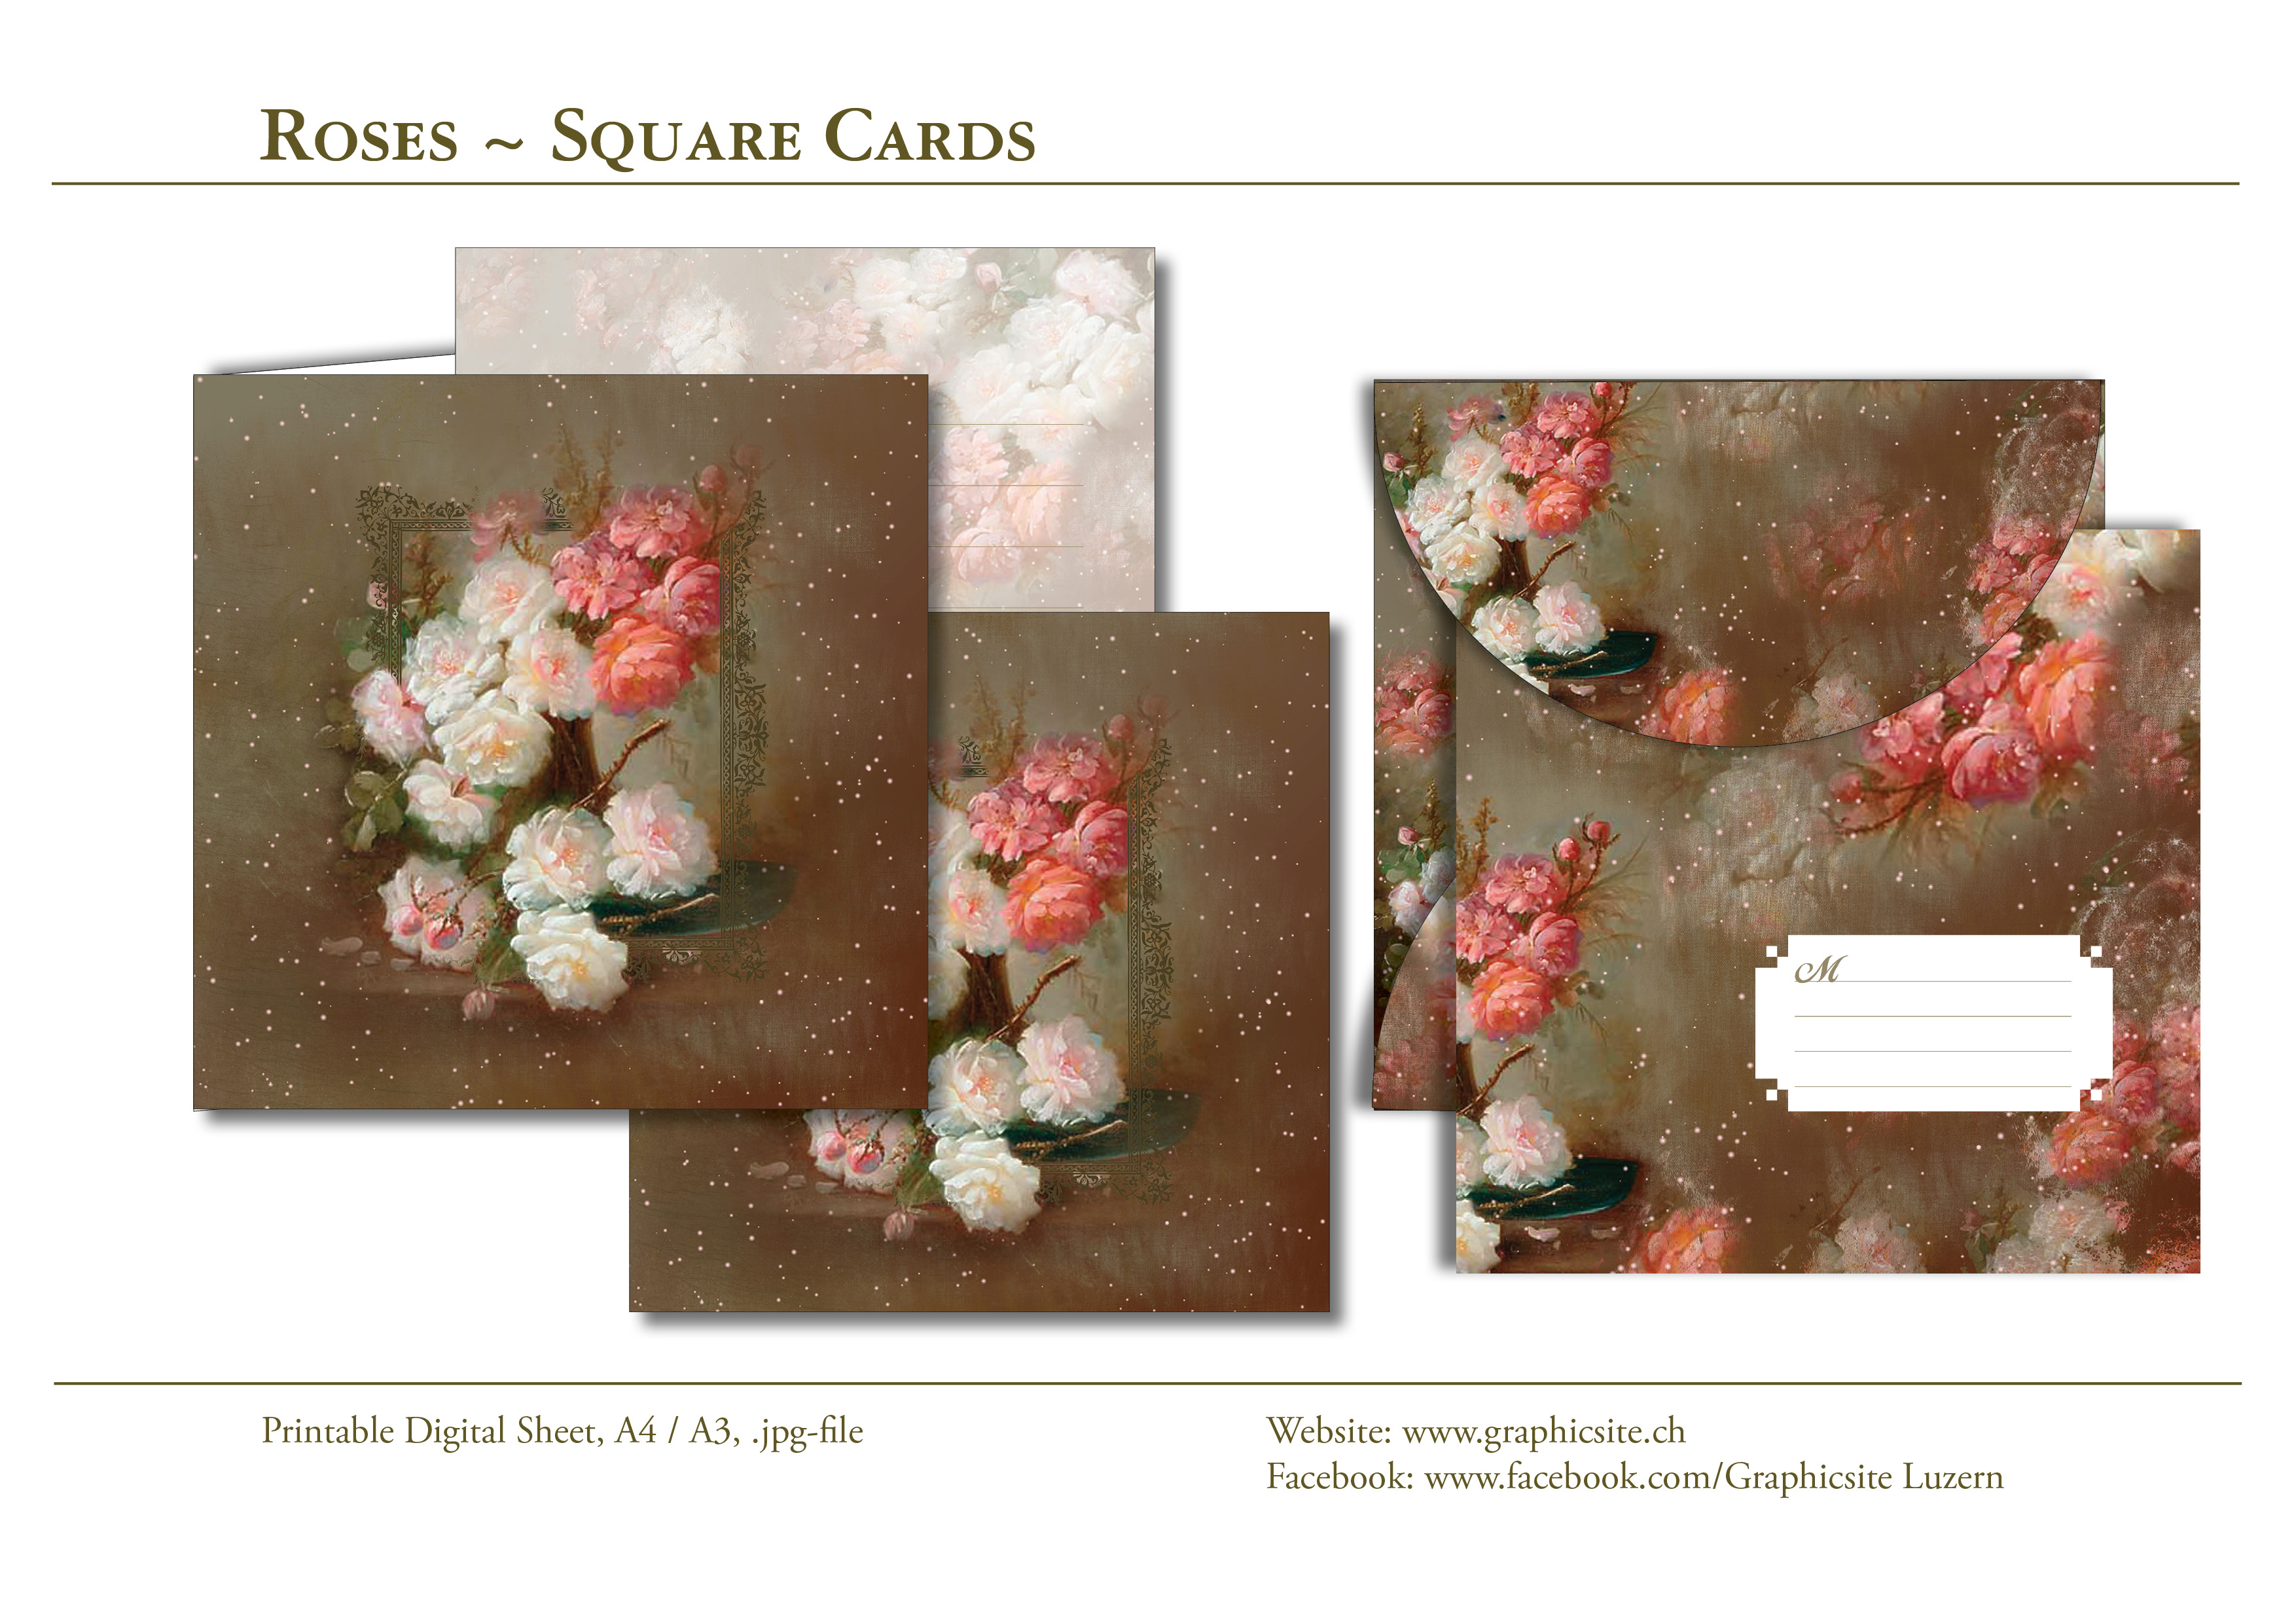 Printable Digital Sheets - Card Collections - Square Cards - Roses - #printables, #greetingcards, #blankcards, #stationary, #rosecards, #floralcards, #graphicdesign, #luzern, #schweiz,